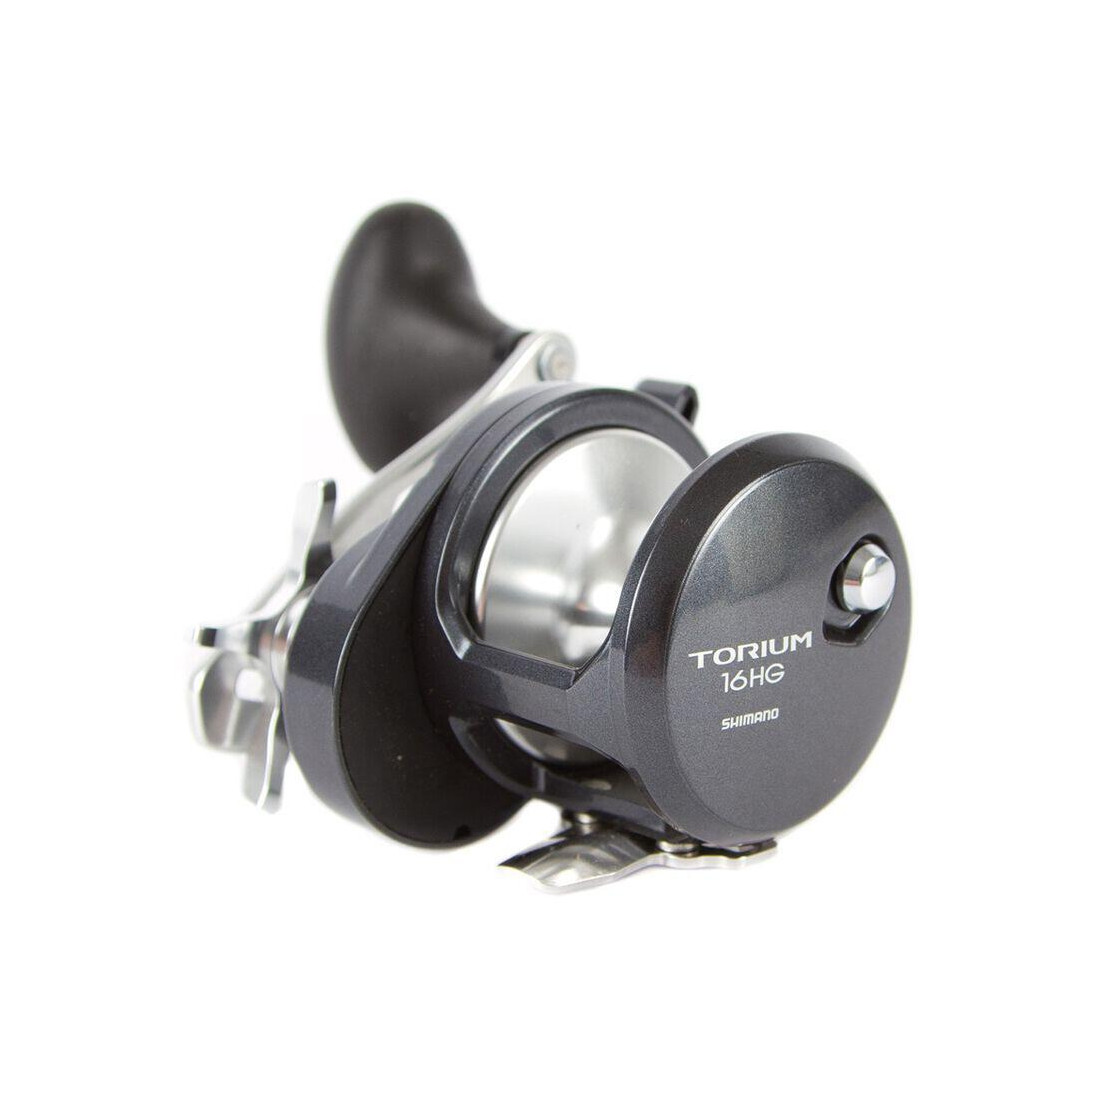 Shimano 20 TORIUM 1500HG Right Handed Saltwater Fishing Reel New in Box 